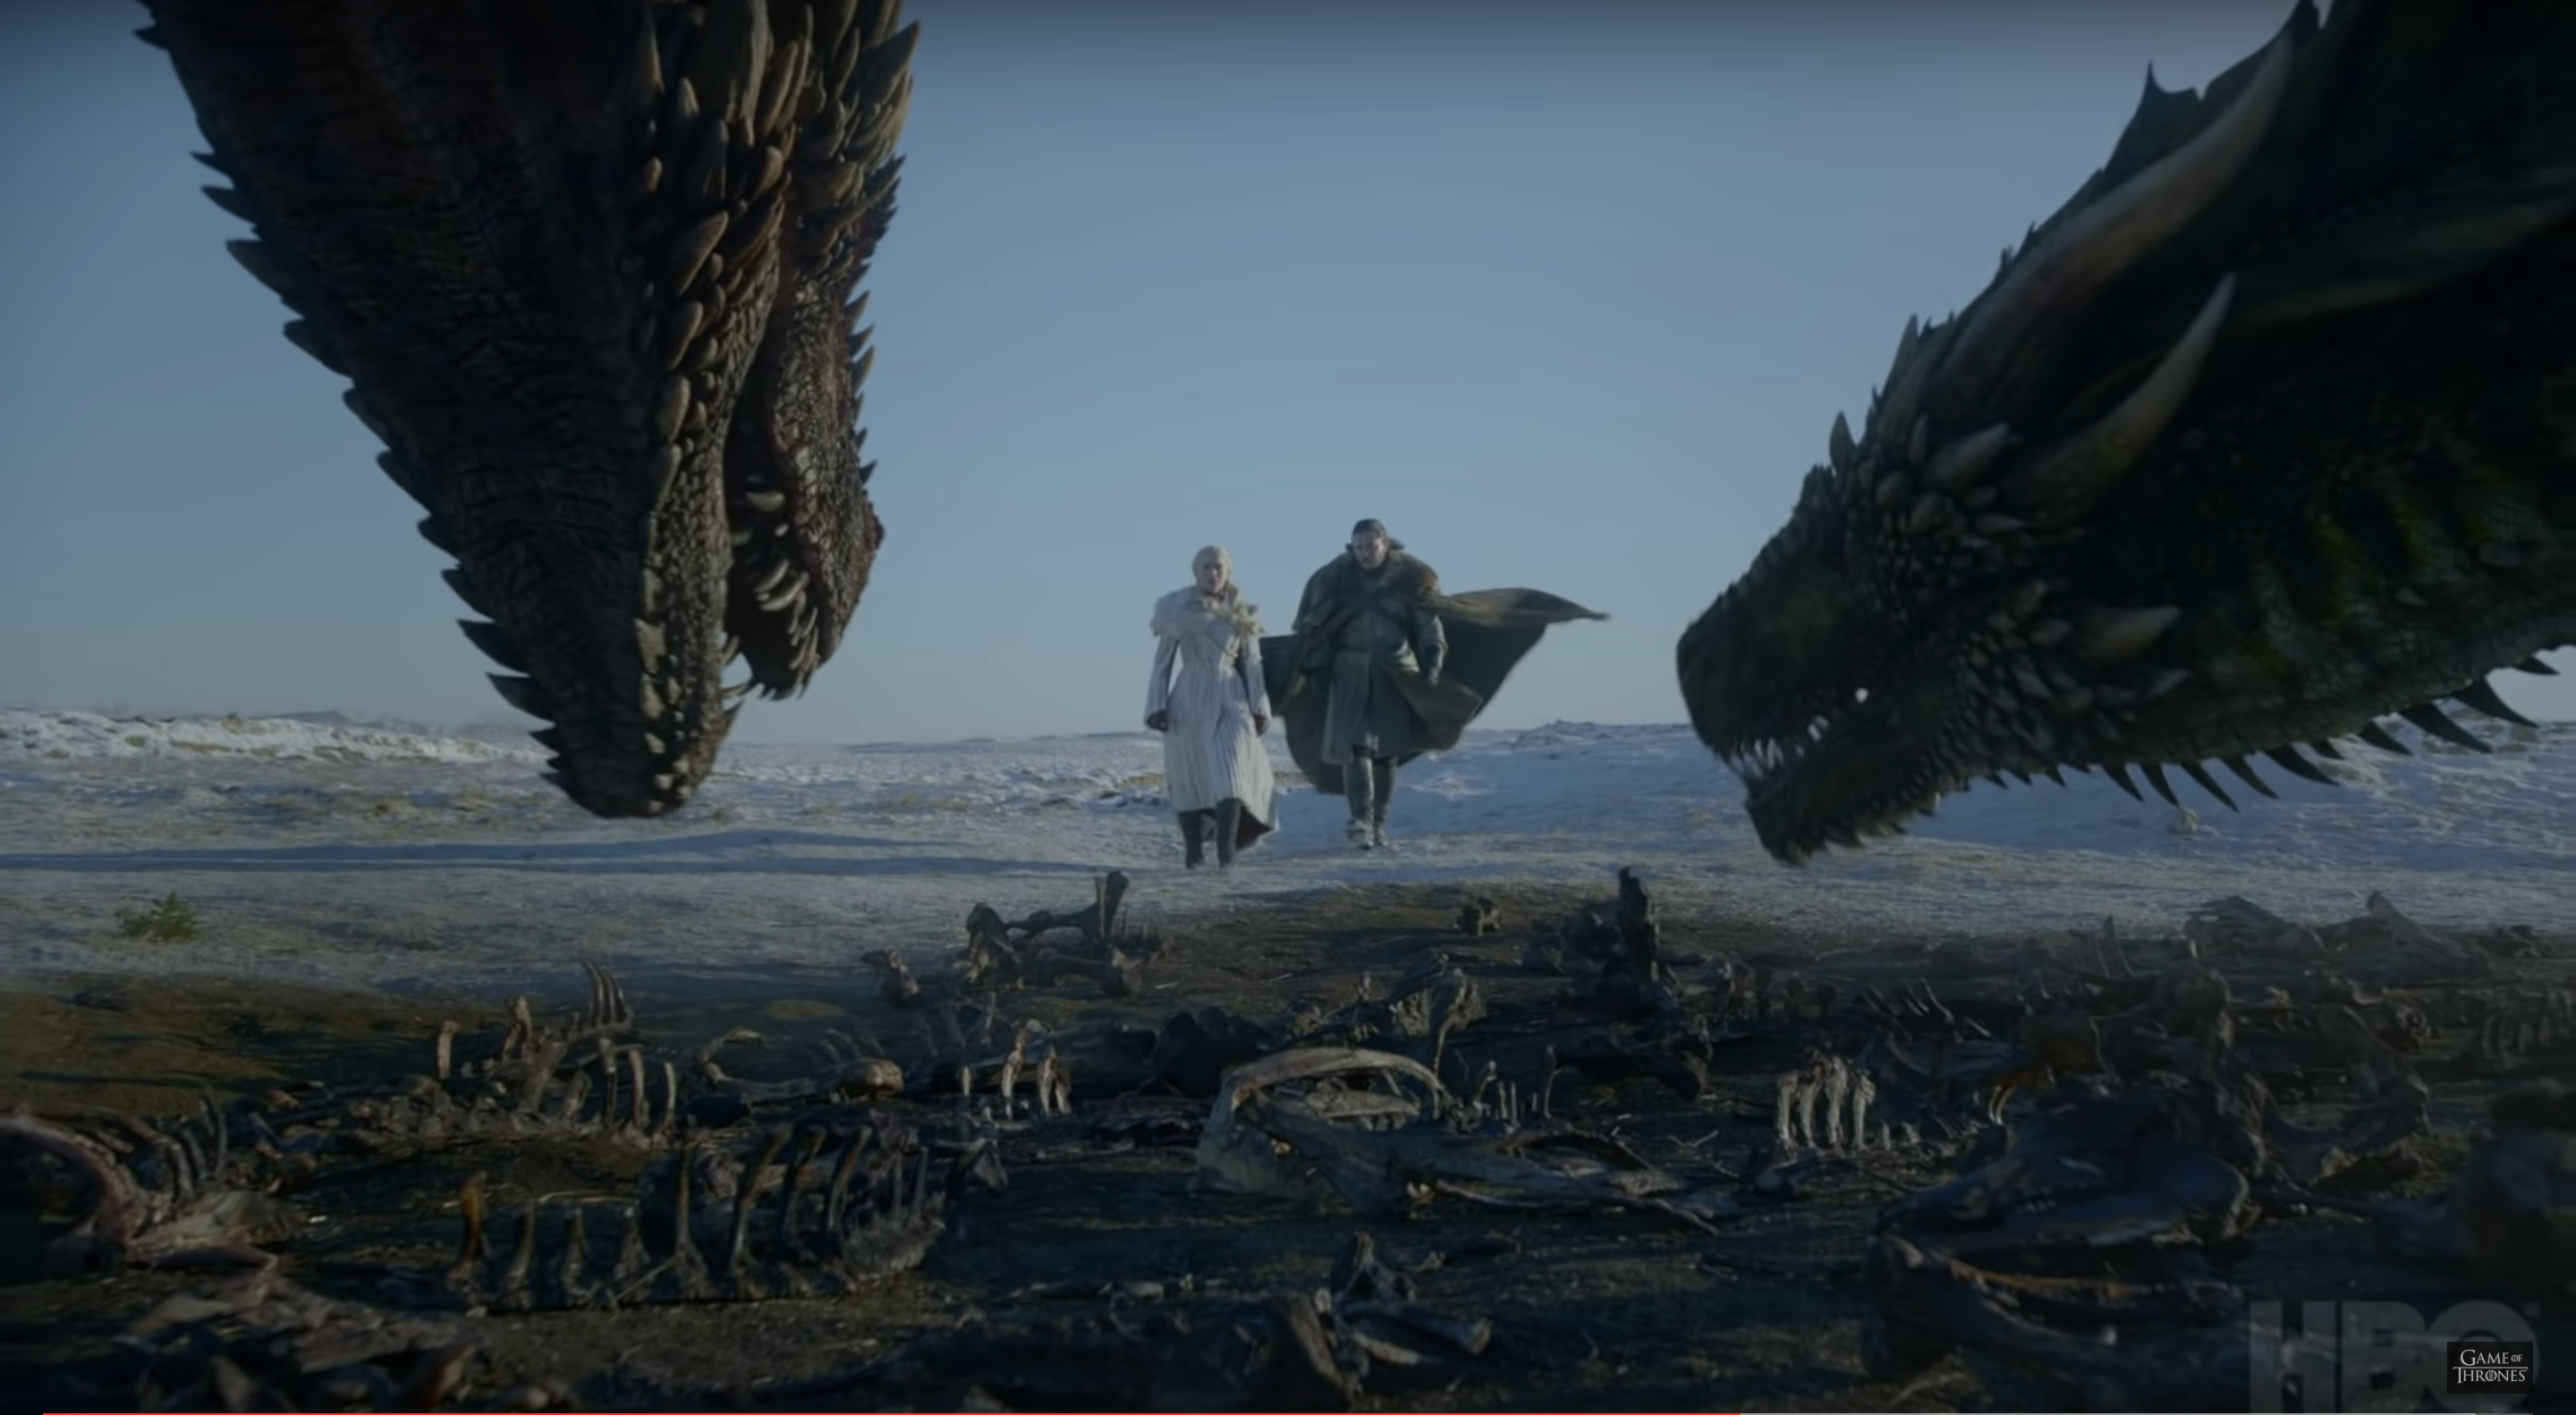 How To Watch Game Of Thrones Season 8 Online Stream Got Live